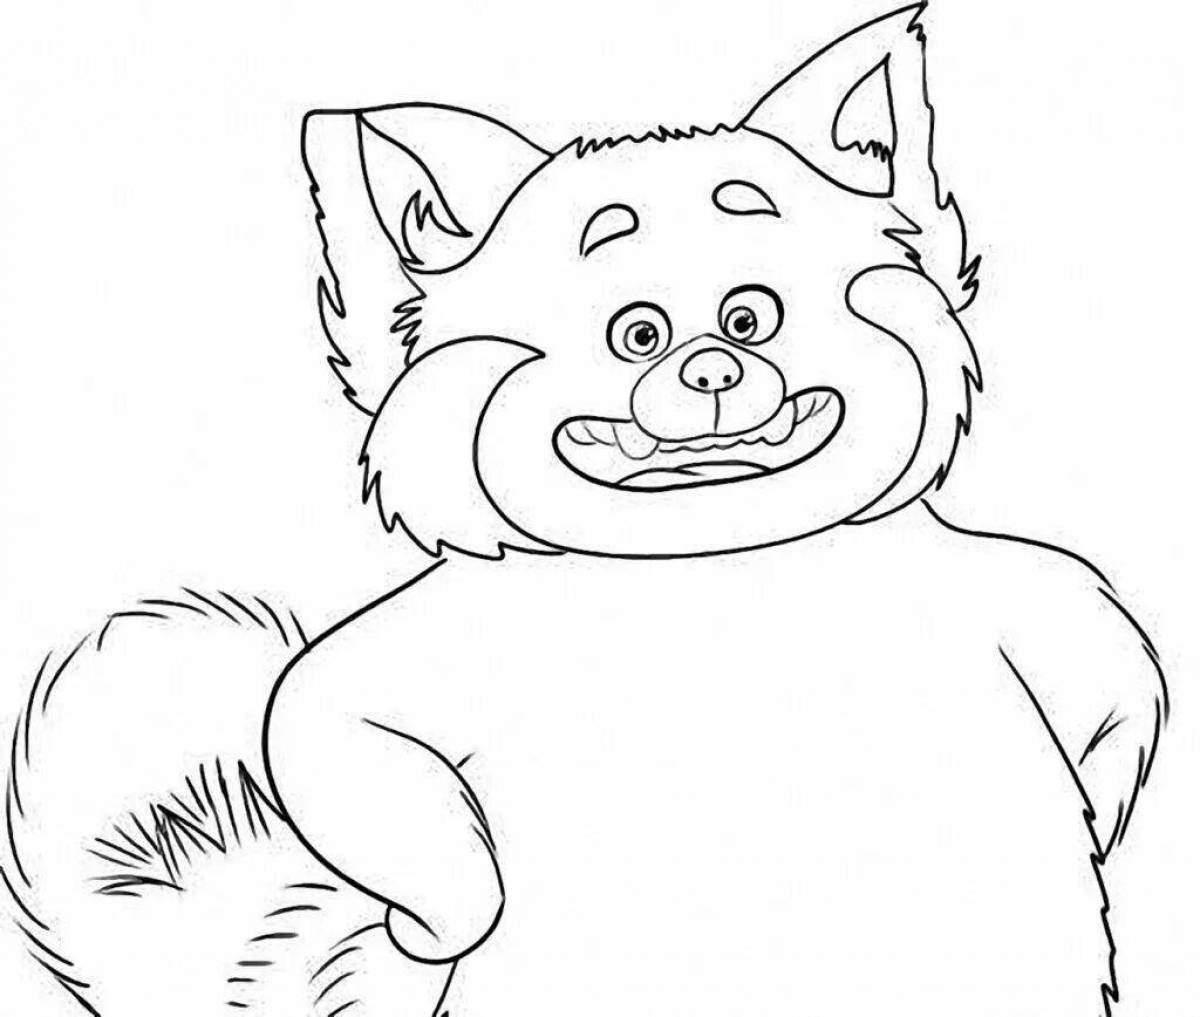 Coloring page charming red friend